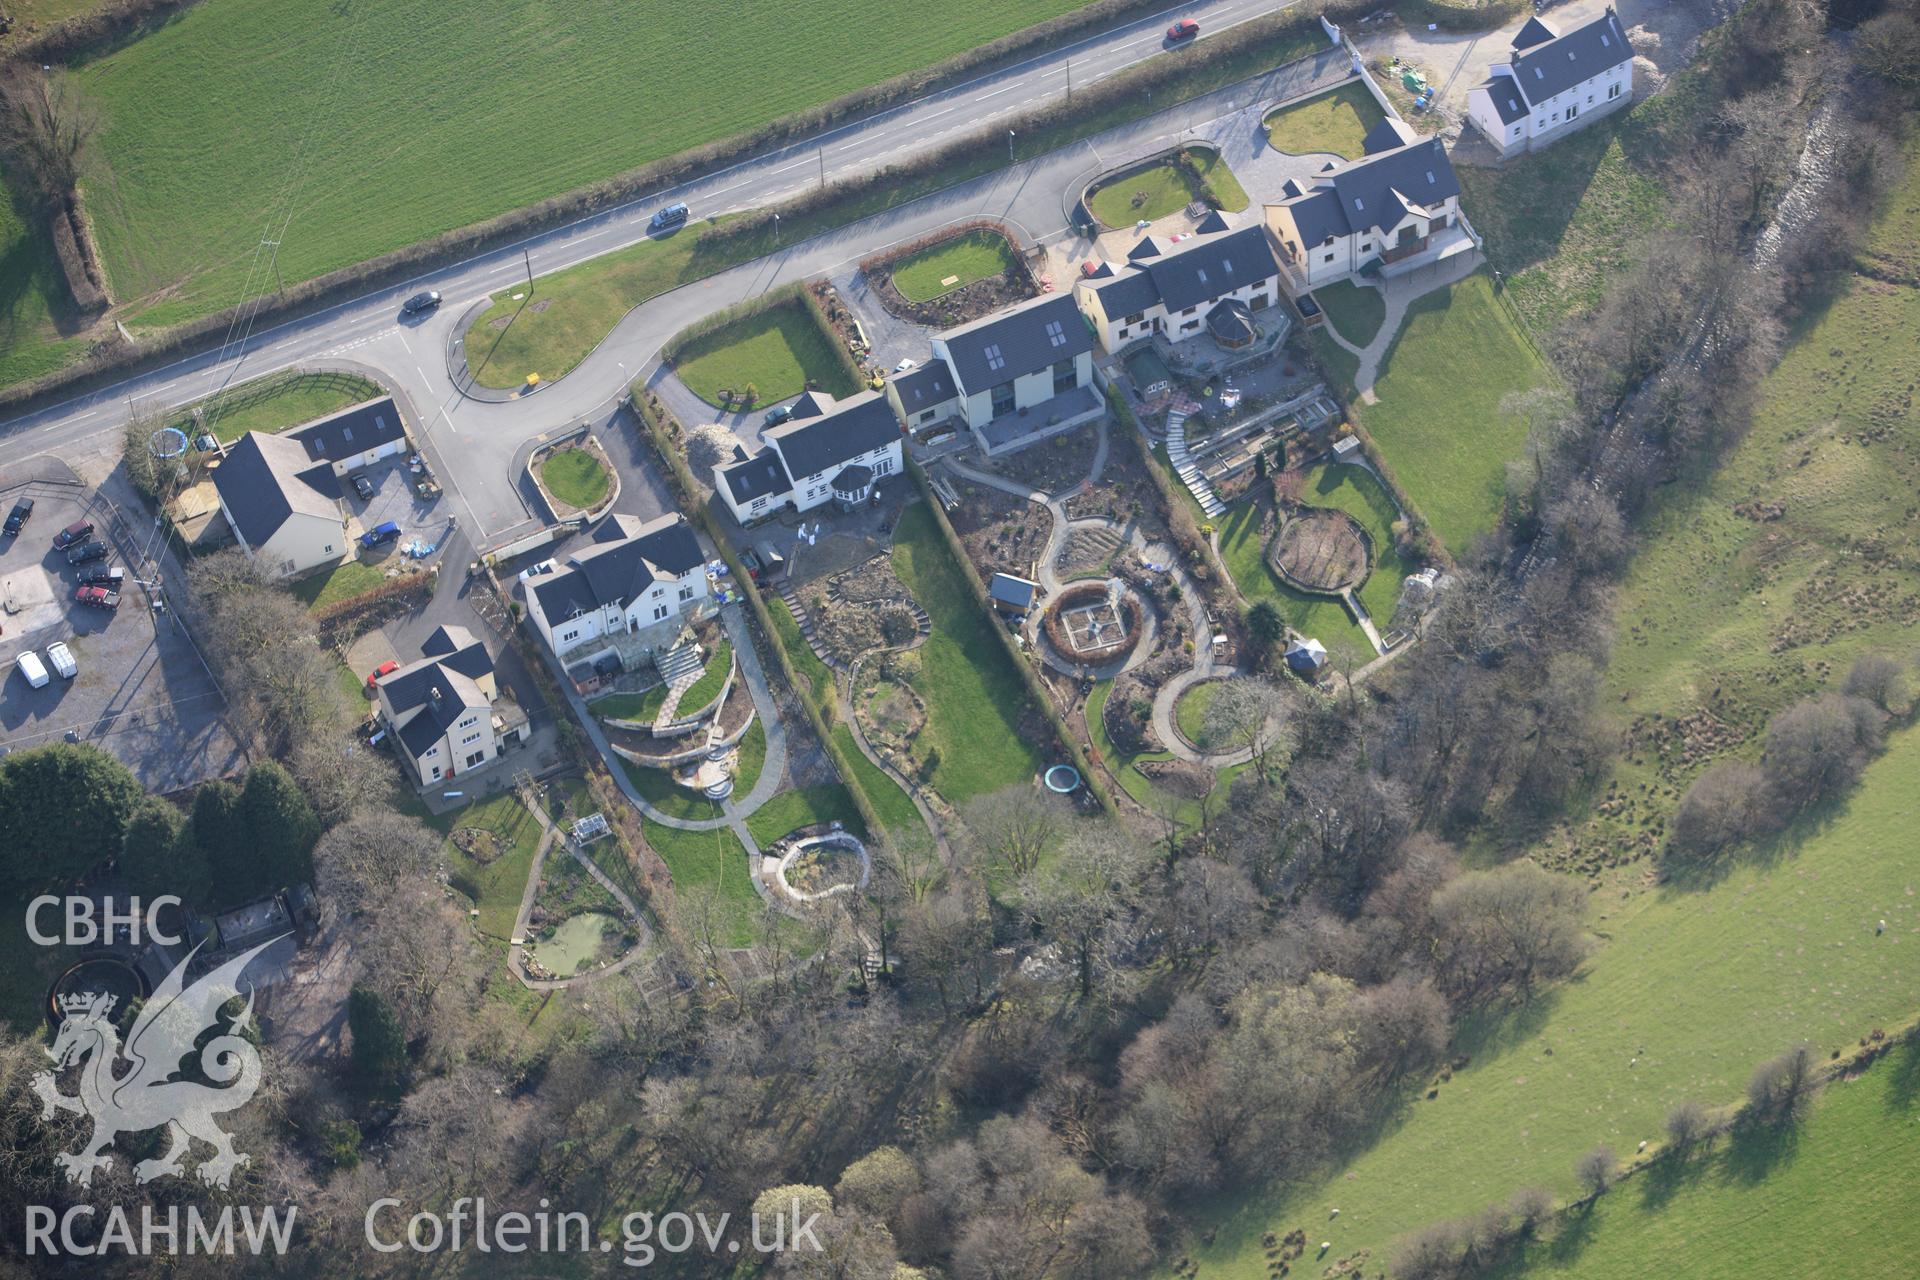 RCAHMW colour oblique aerial photograph of Cynwyl Elfed showing modern houses. Taken on 13 April 2010 by Toby Driver